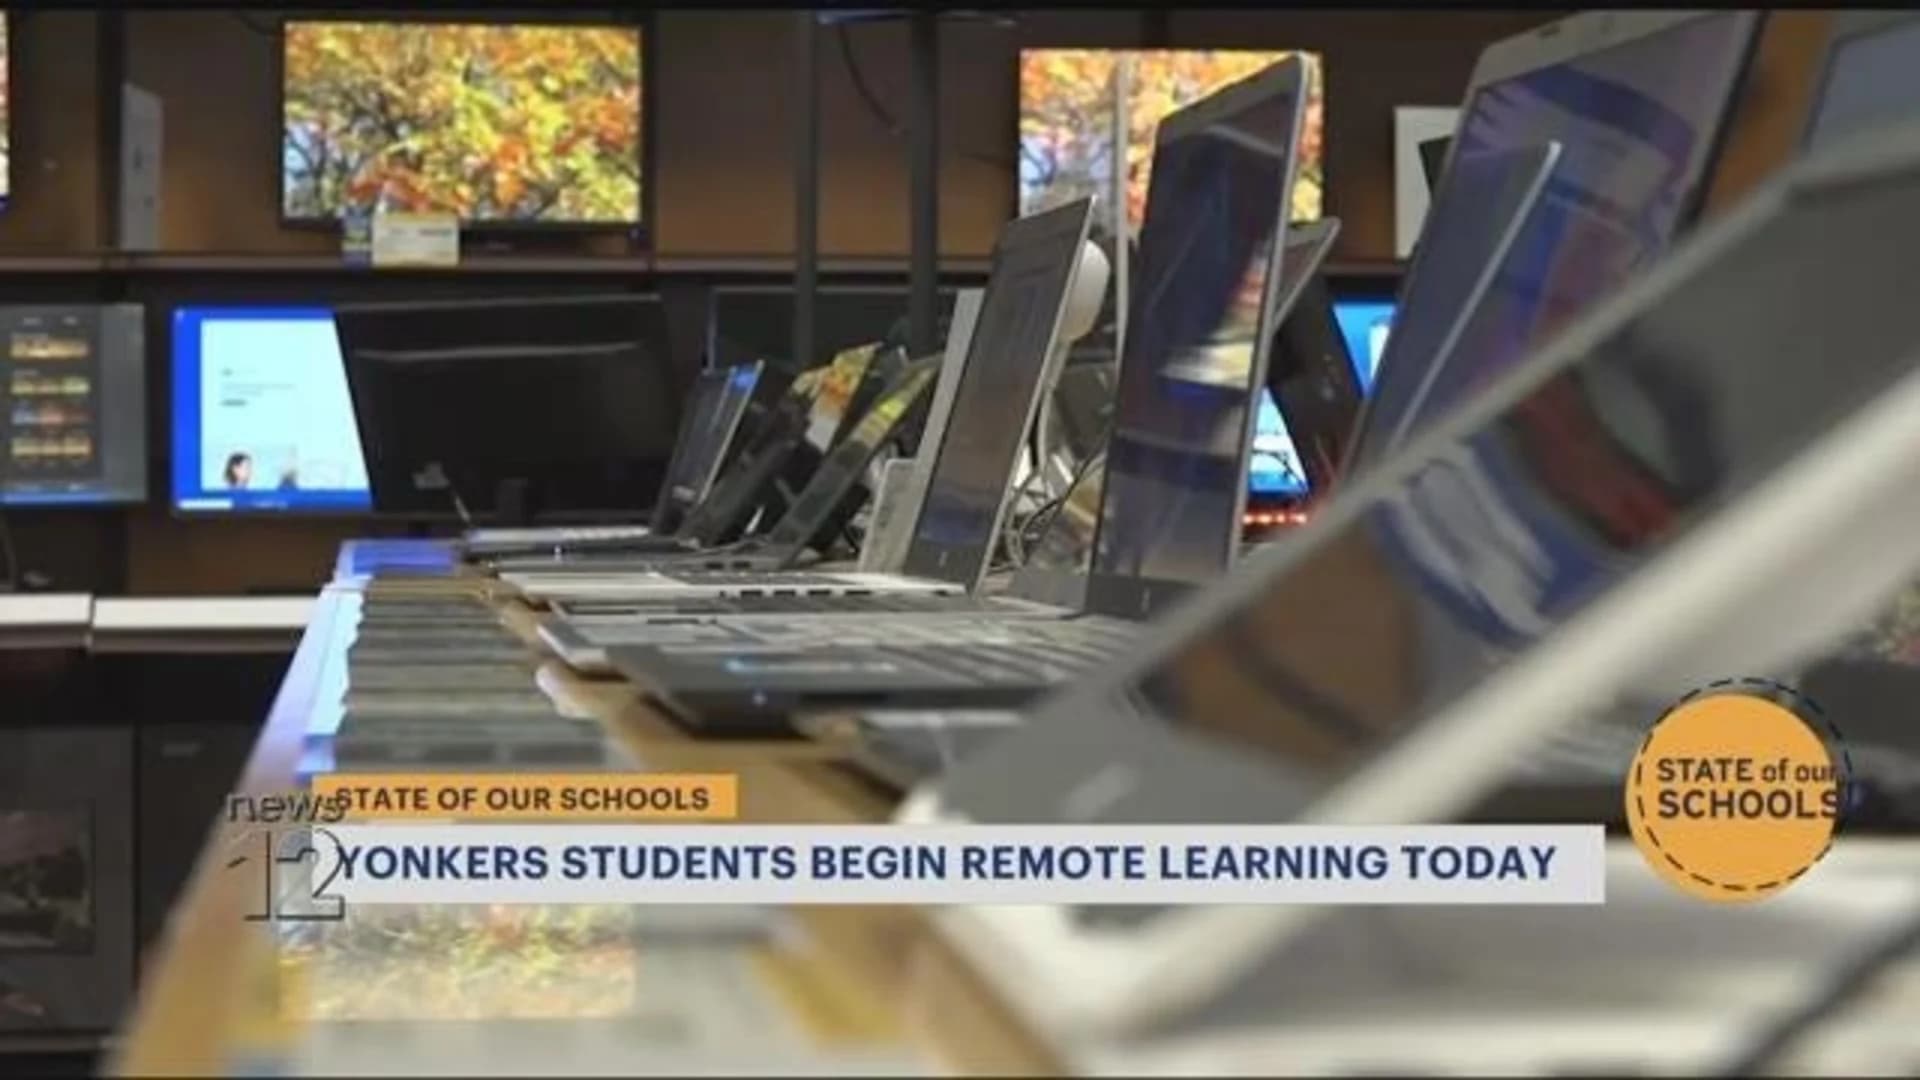 Parents report technical issues as Yonkers schools open for remote learning